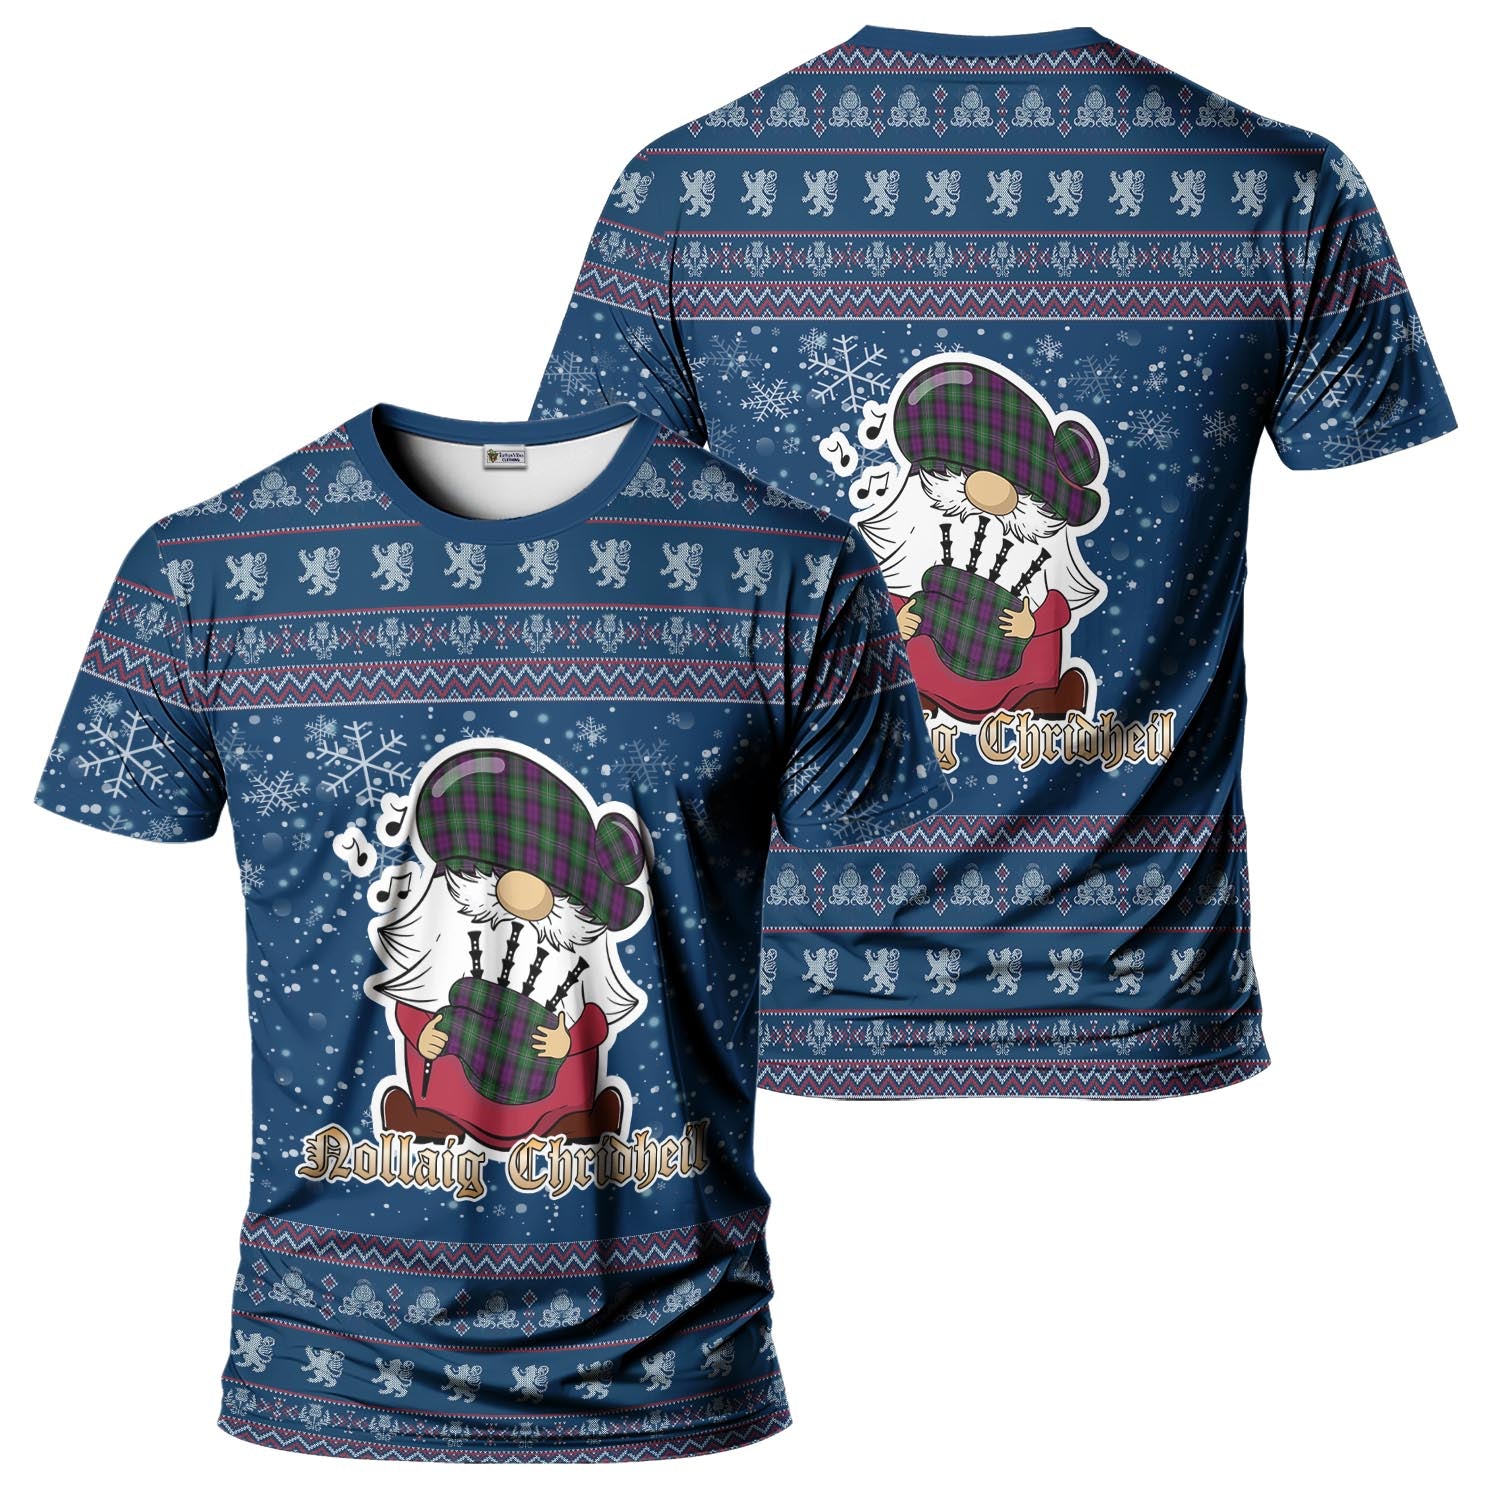 Wilson Clan Christmas Family T-Shirt with Funny Gnome Playing Bagpipes Kid's Shirt Blue - Tartanvibesclothing